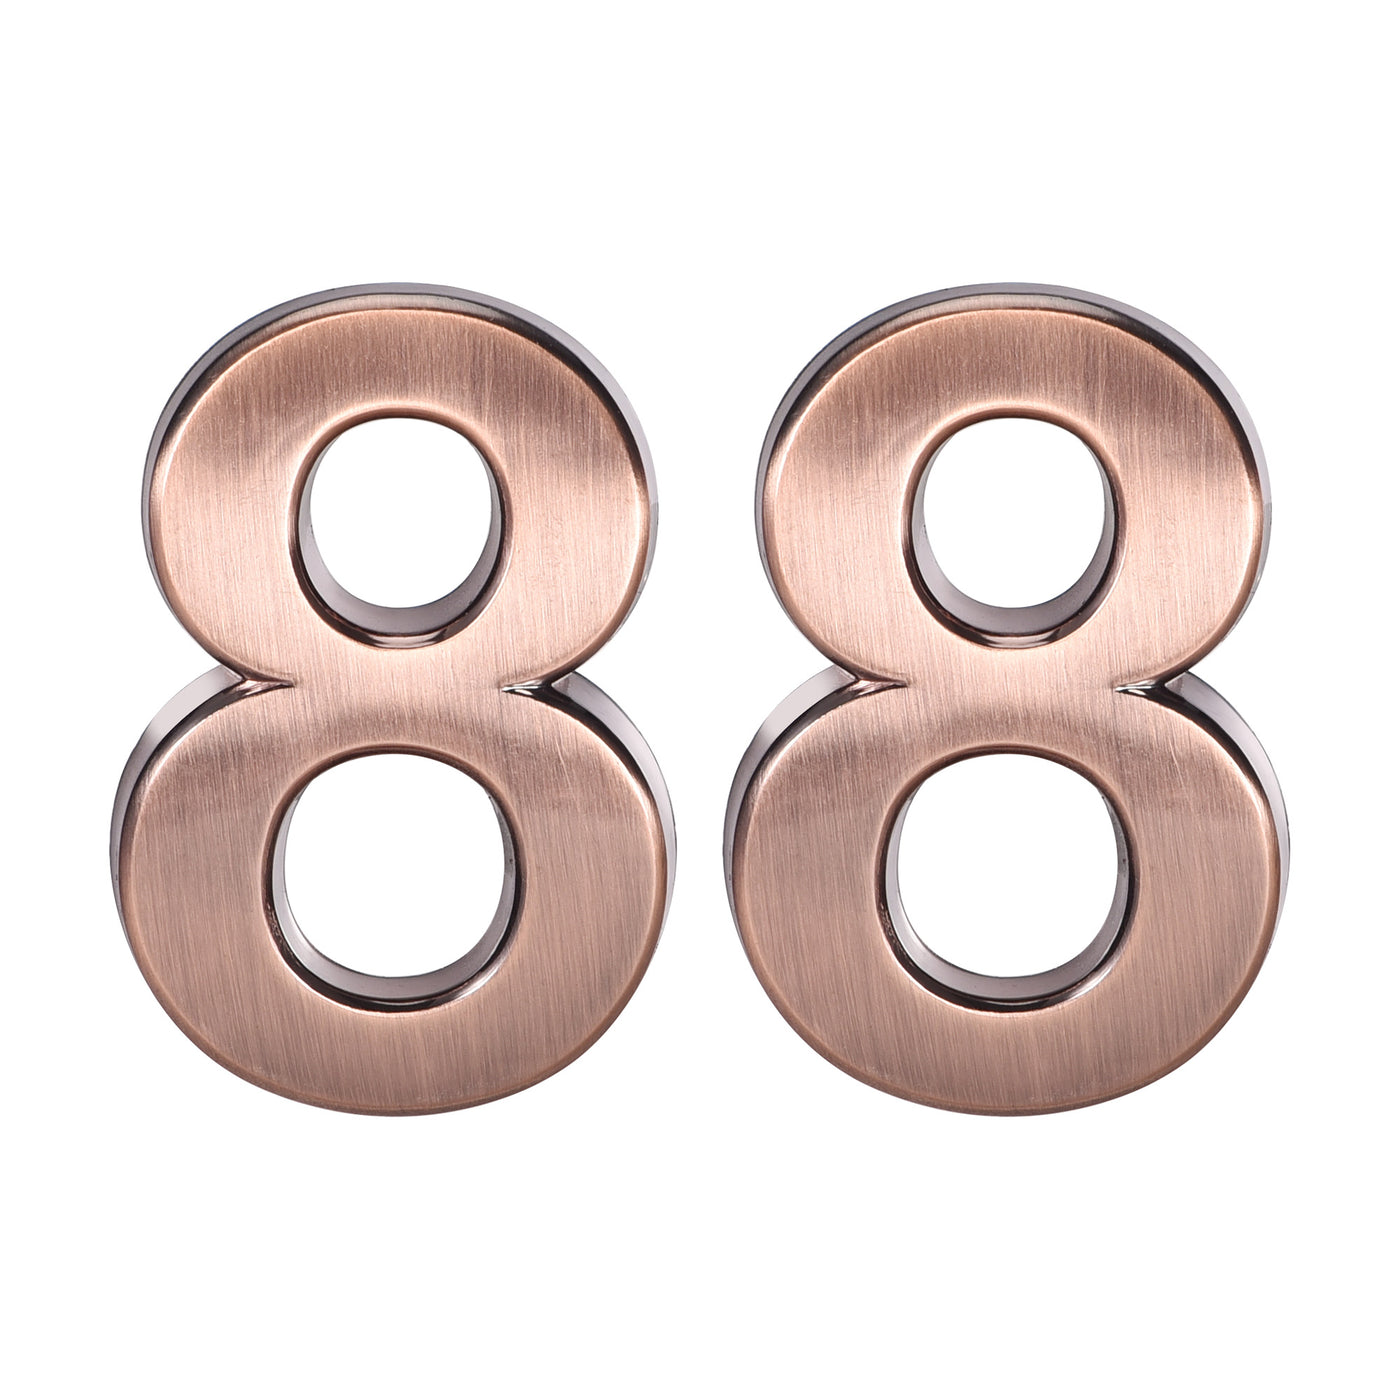 Uxcell Uxcell Self Adhesive House Number, 1.97 Inch ABS Plastic Number 1 for House Hotel Mailbox Address Sign Bronze Brushed 2 Pcs